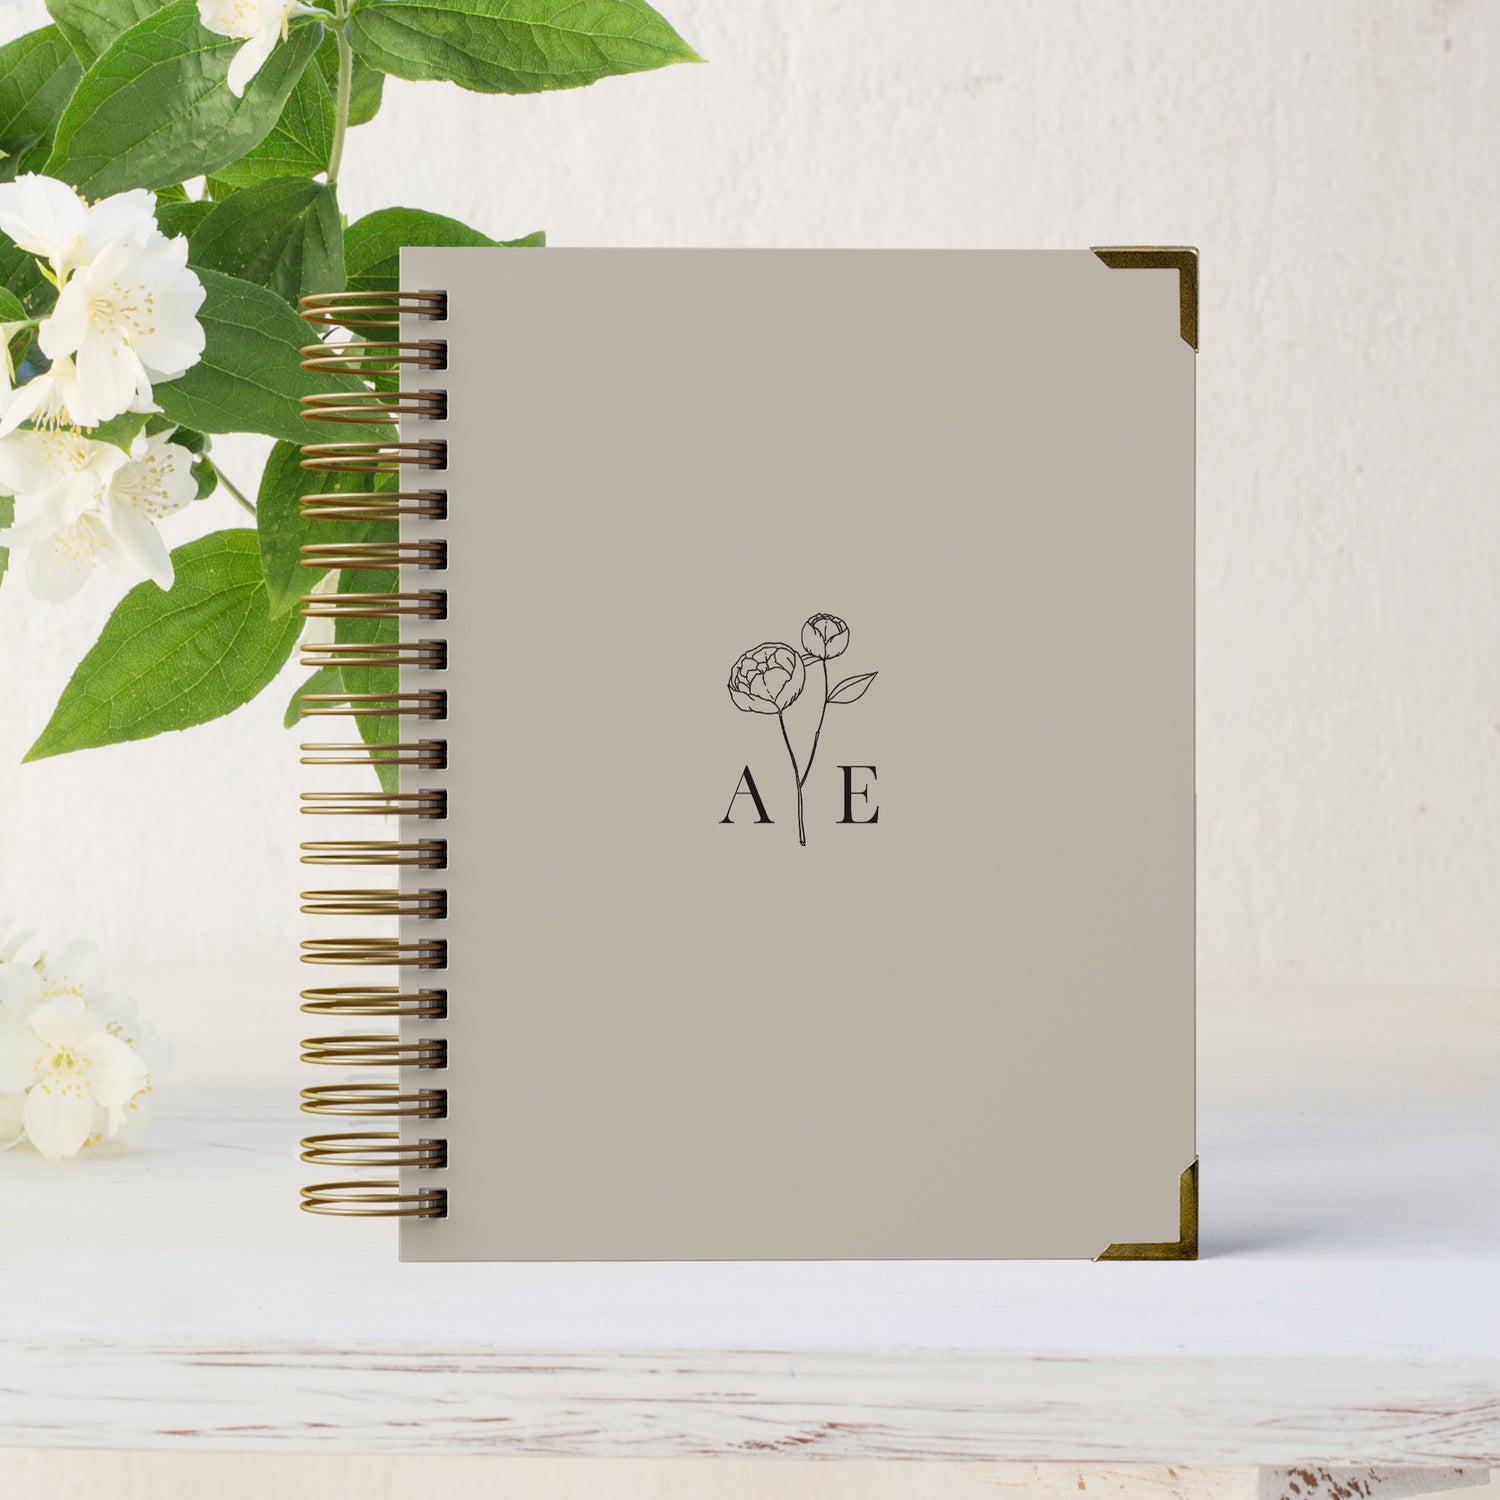 The Wicked Bride Wedding Planner Book is the best wedding planner you can find, with dozens of design options and colors your planner can be customized to match your personal style.